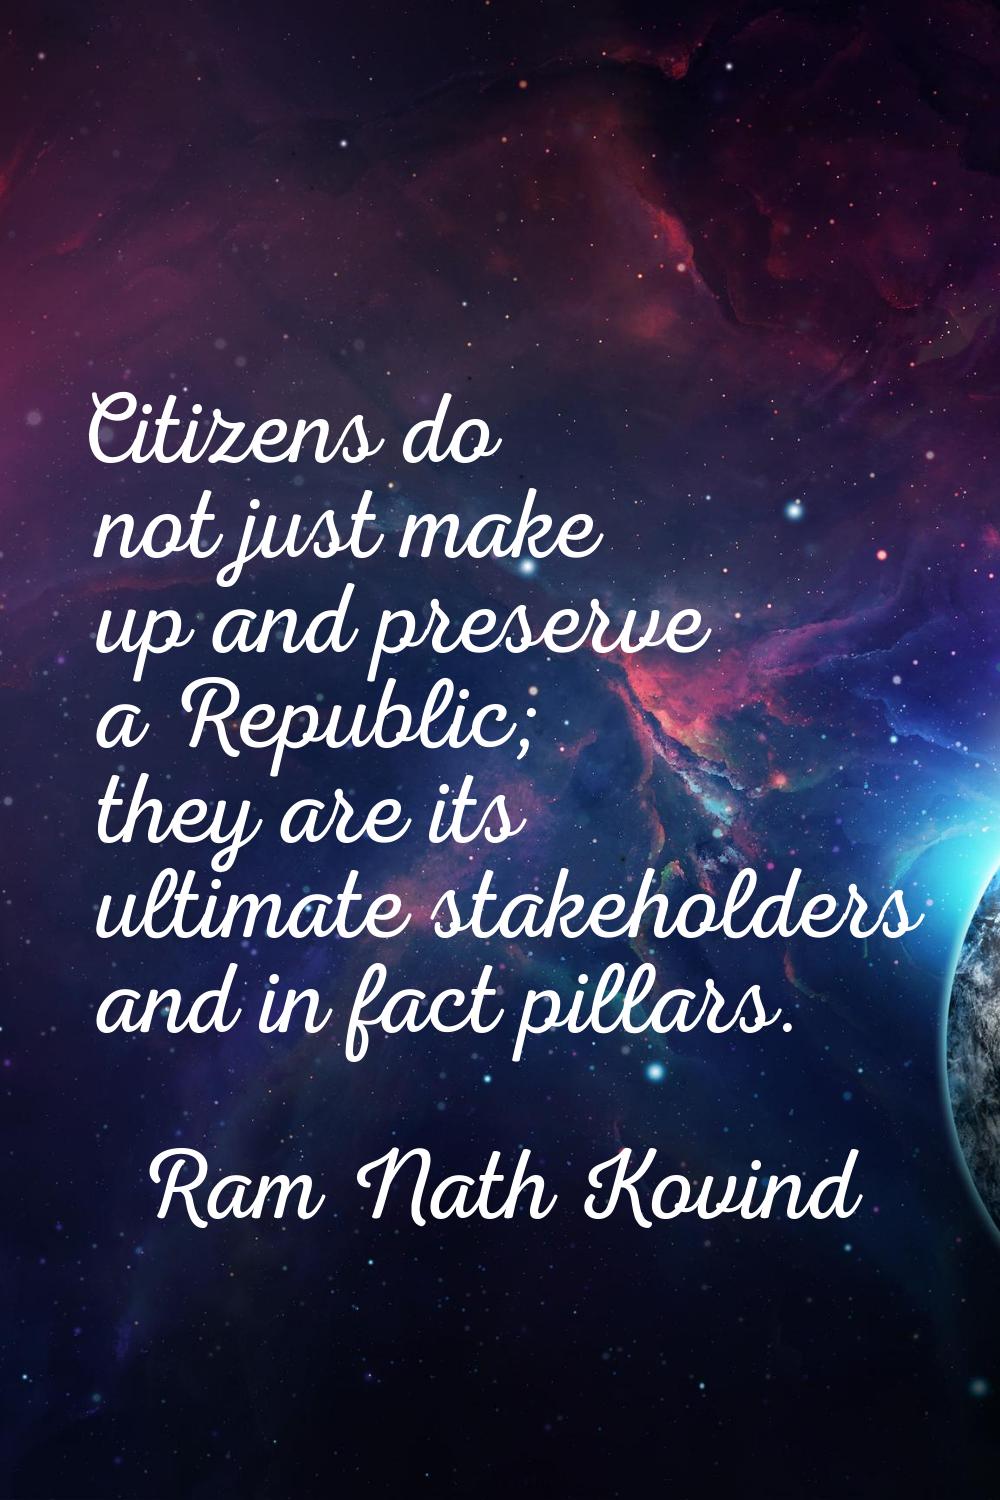 Citizens do not just make up and preserve a Republic; they are its ultimate stakeholders and in fac